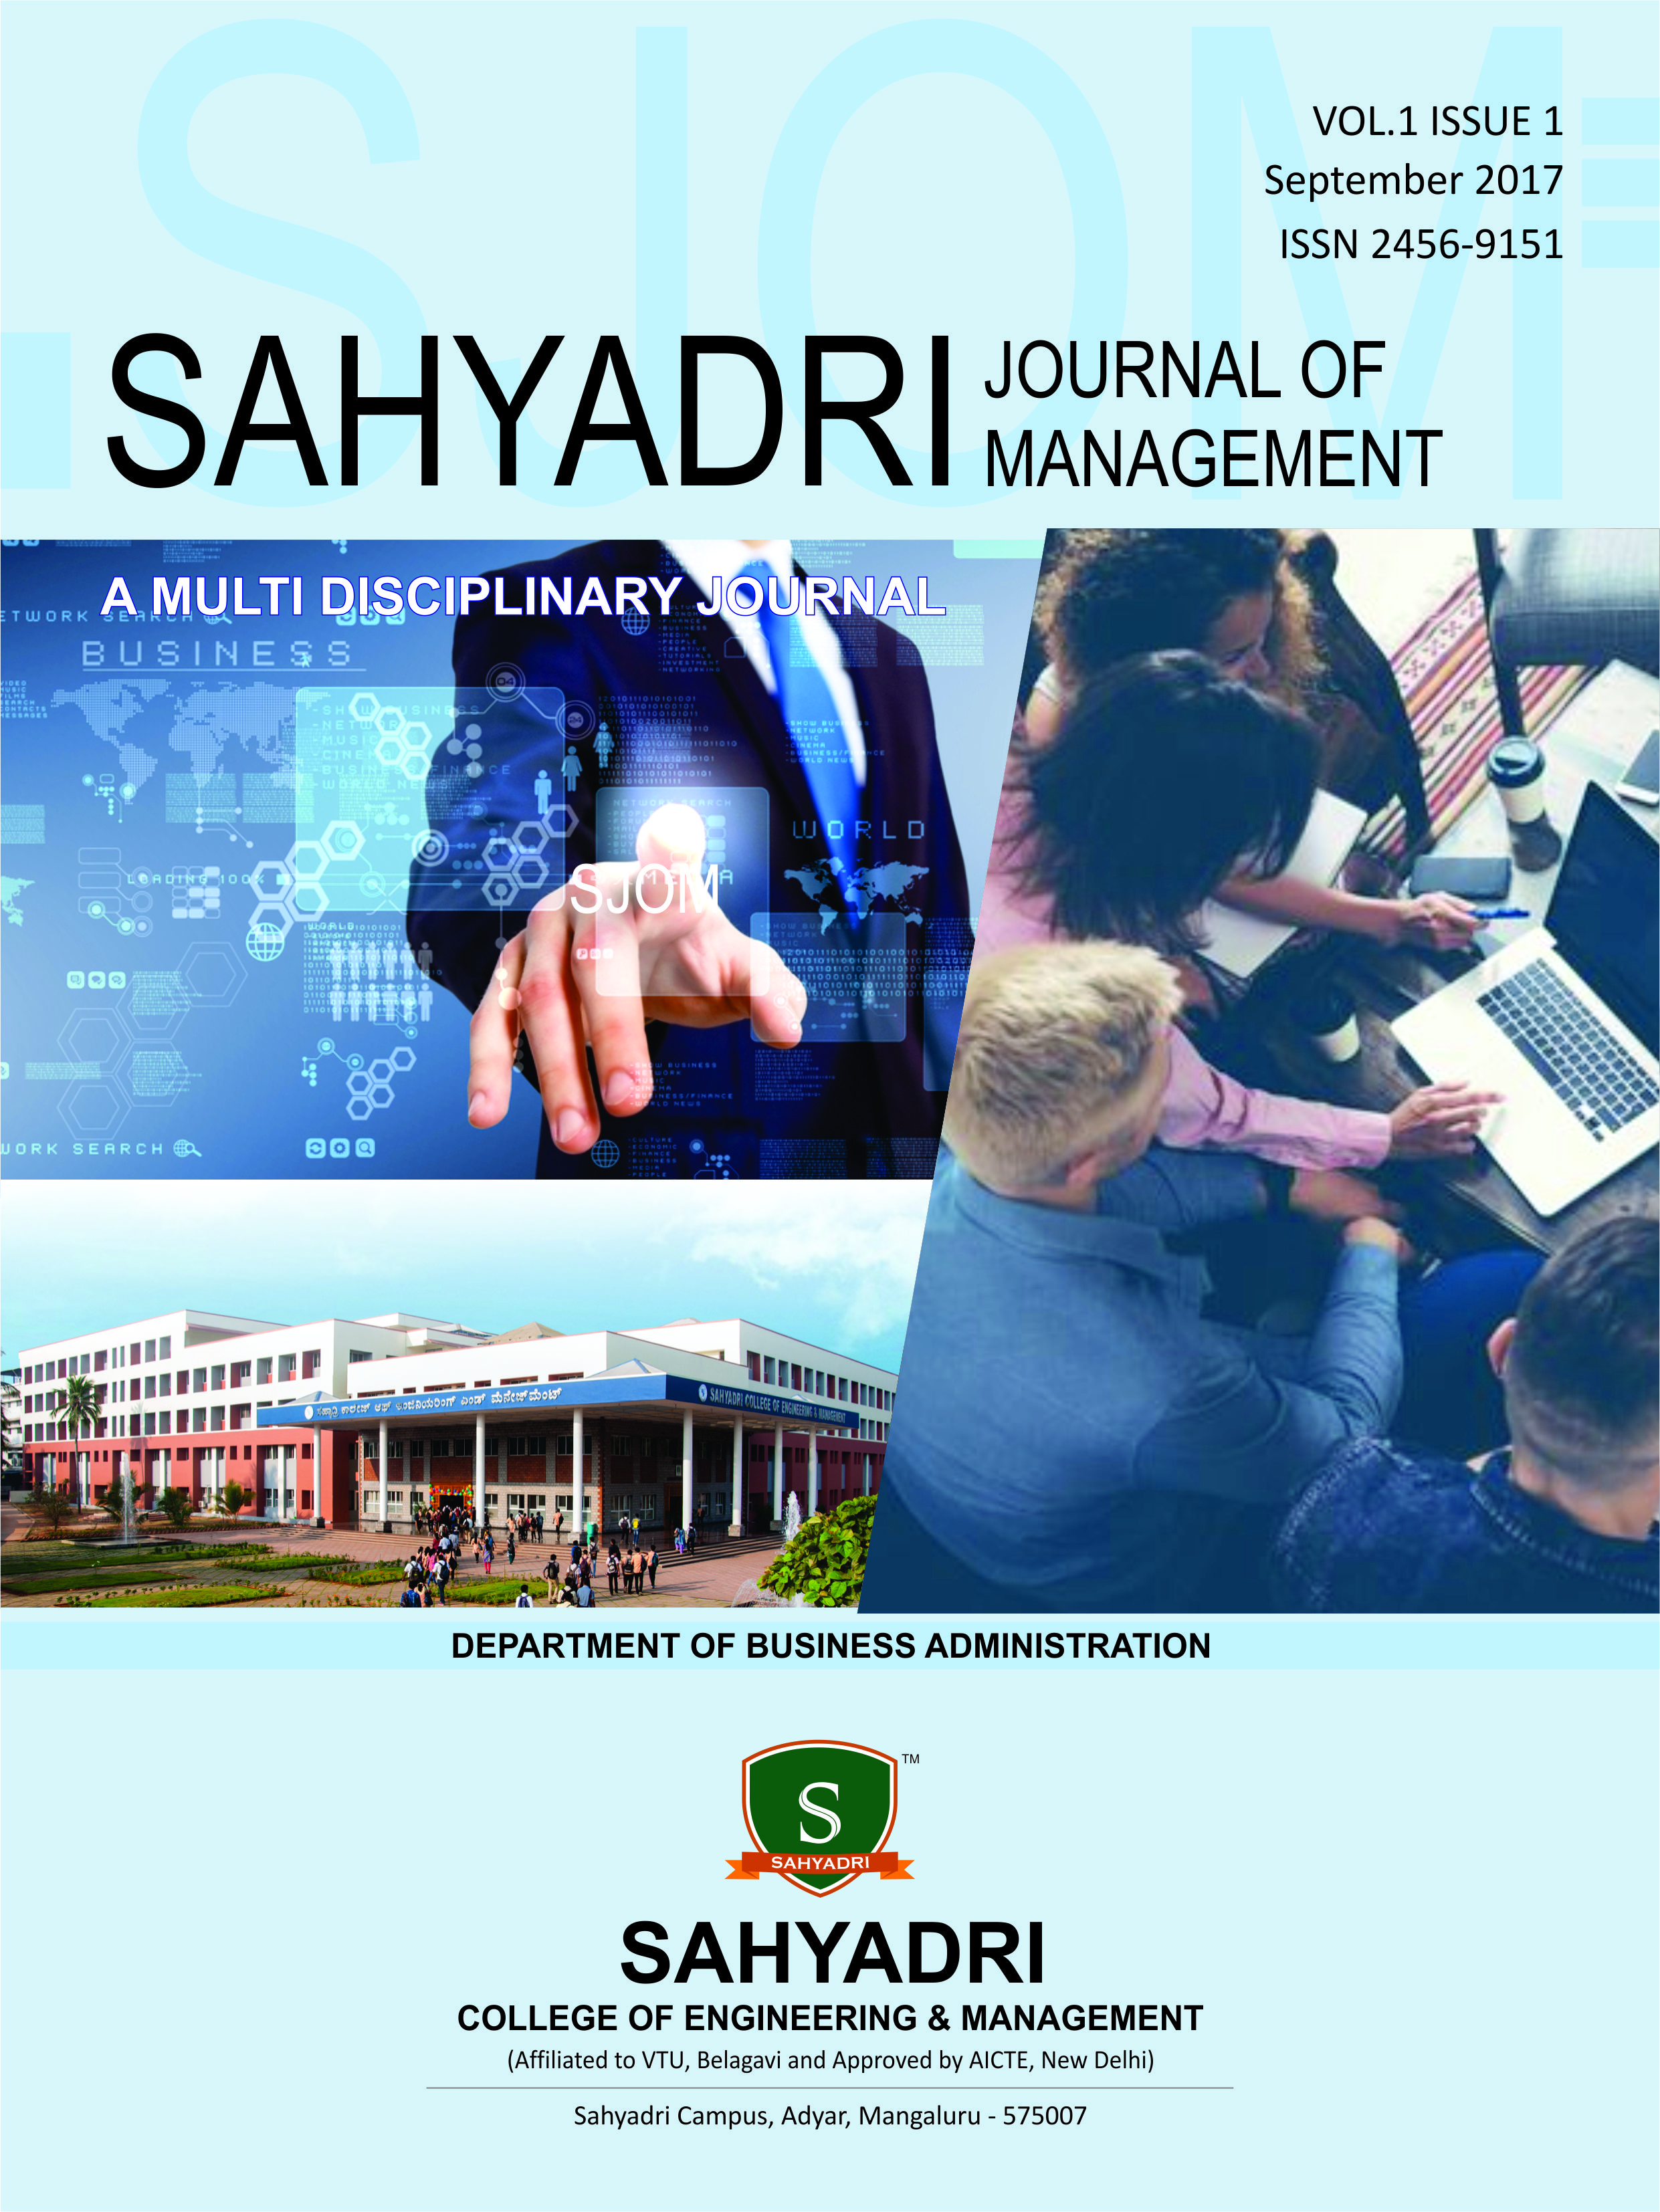 Sahyadri Journal of Management (SJOM) officially launched with Vol. 1, Issue 1